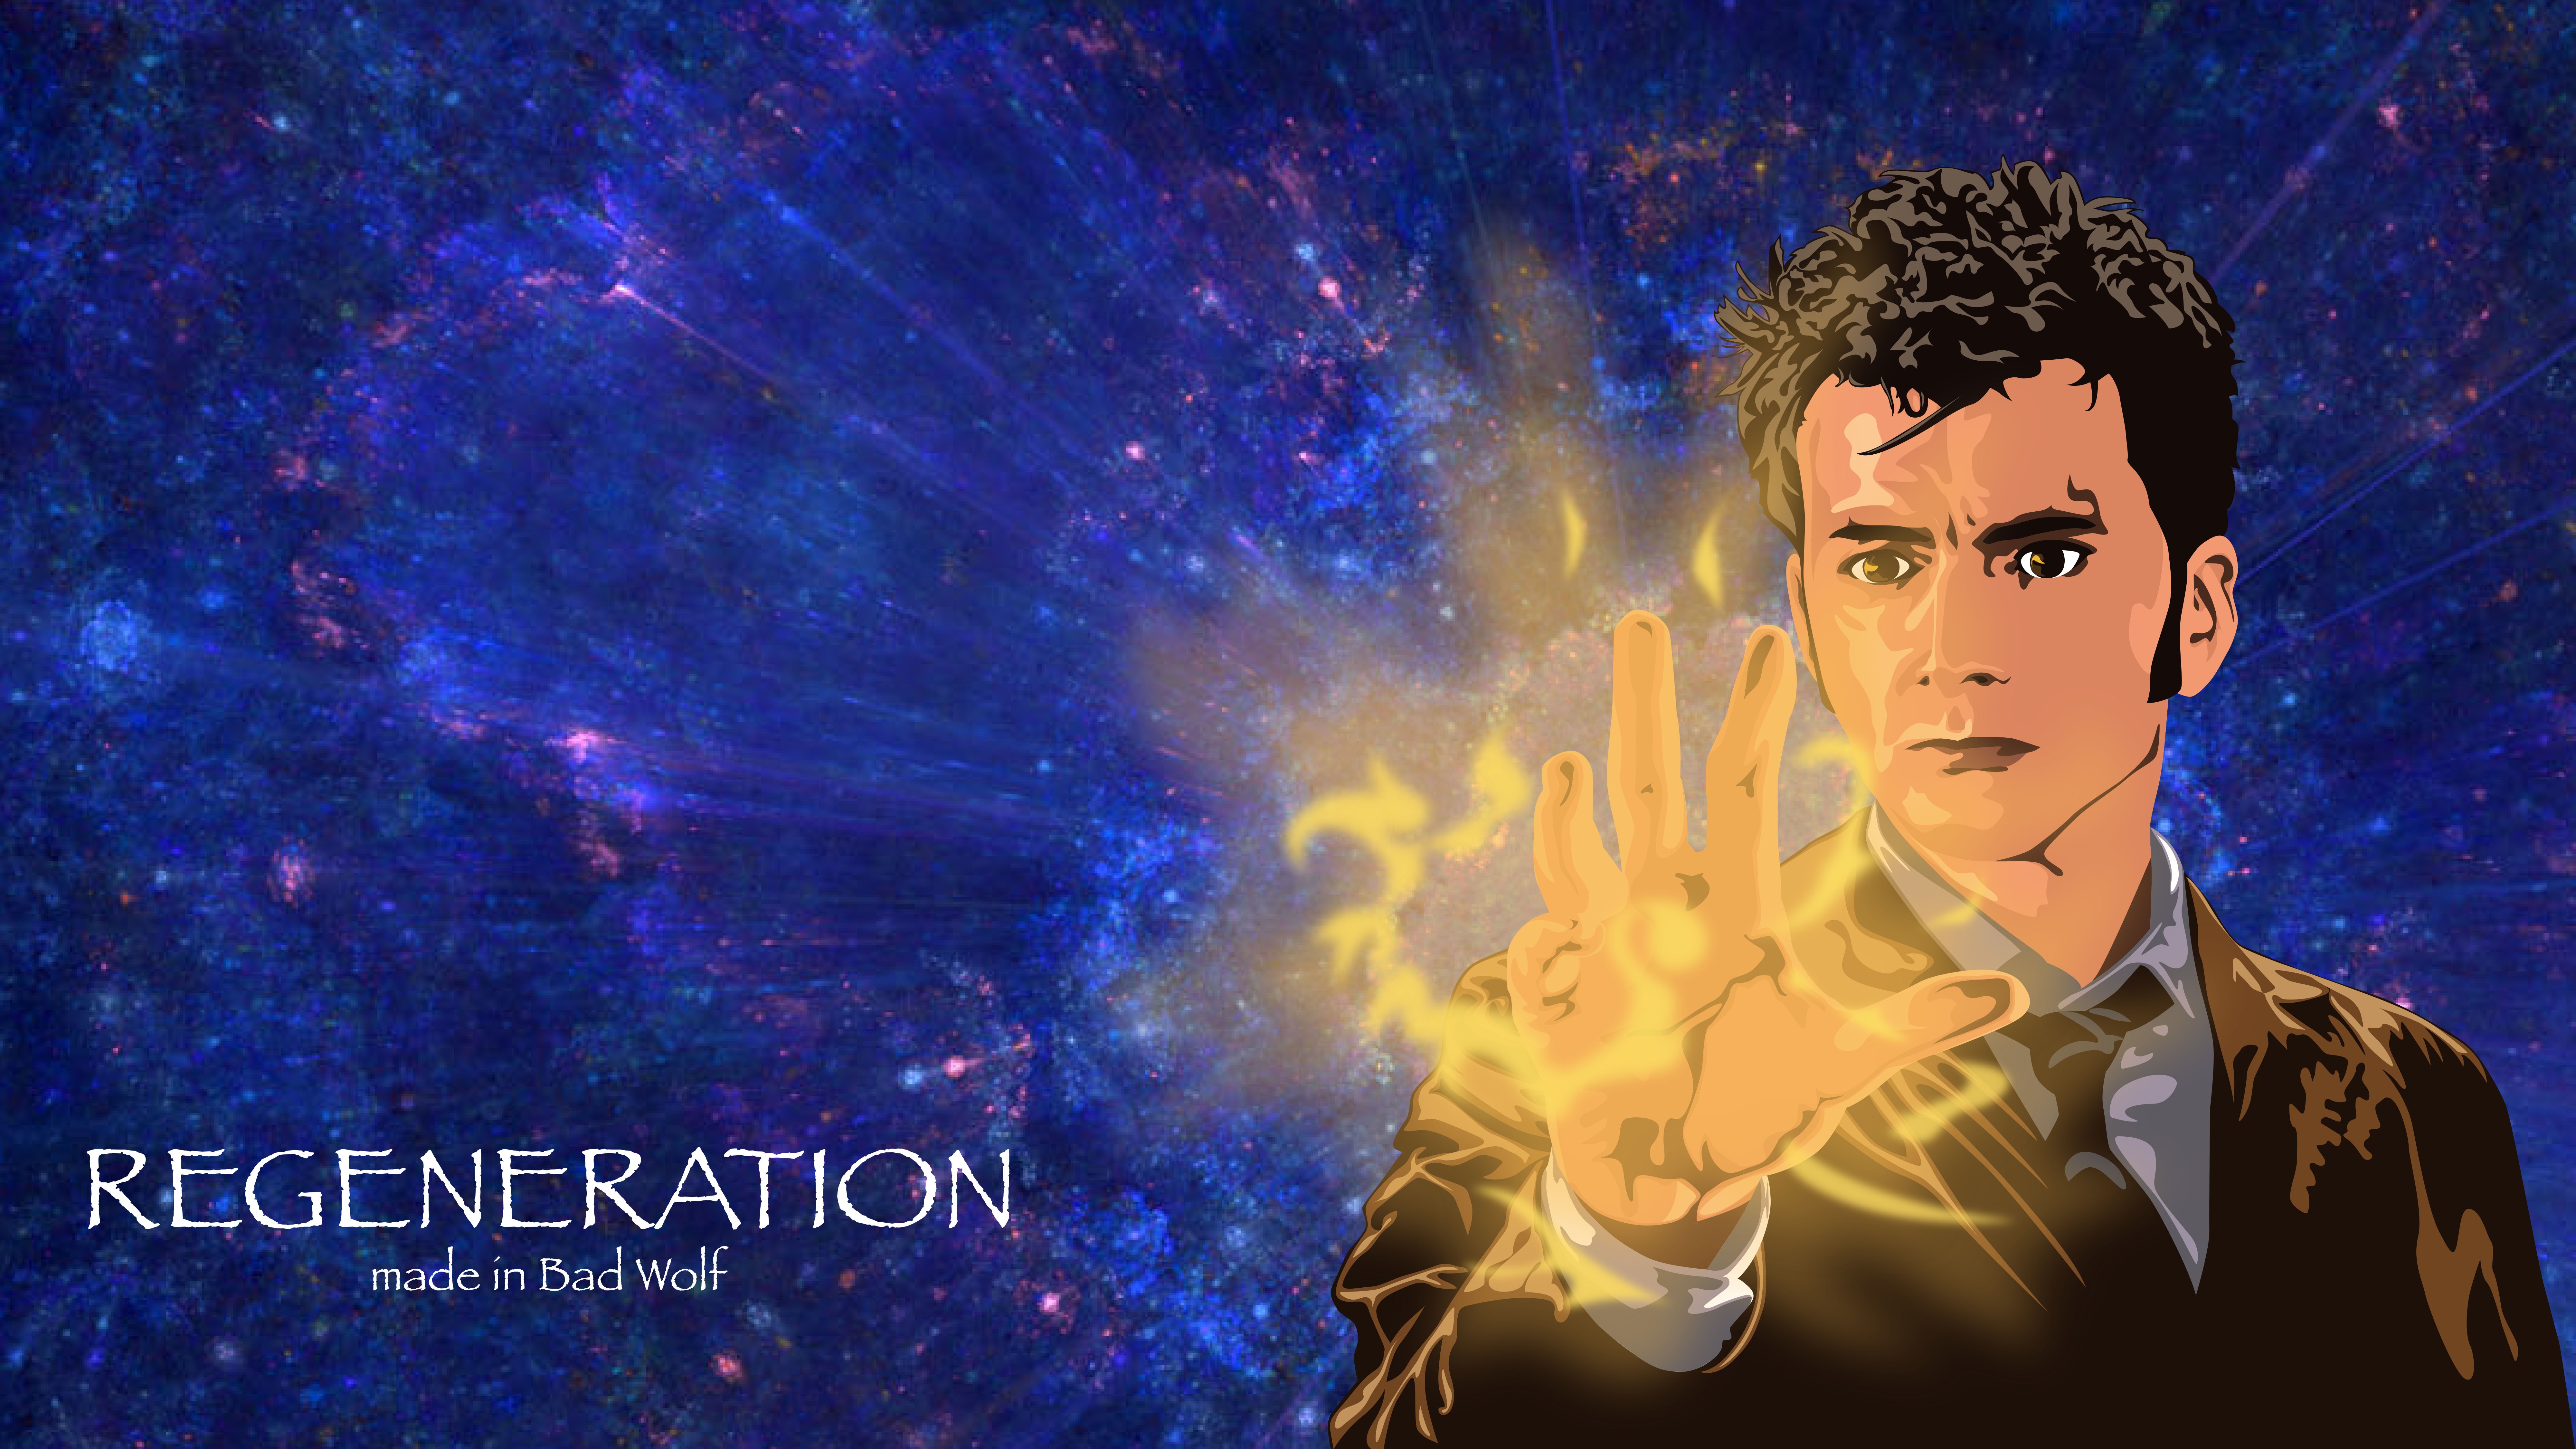 General 8000x4500 Tenth Doctor popculture Doctor Who fan art science fiction TV series